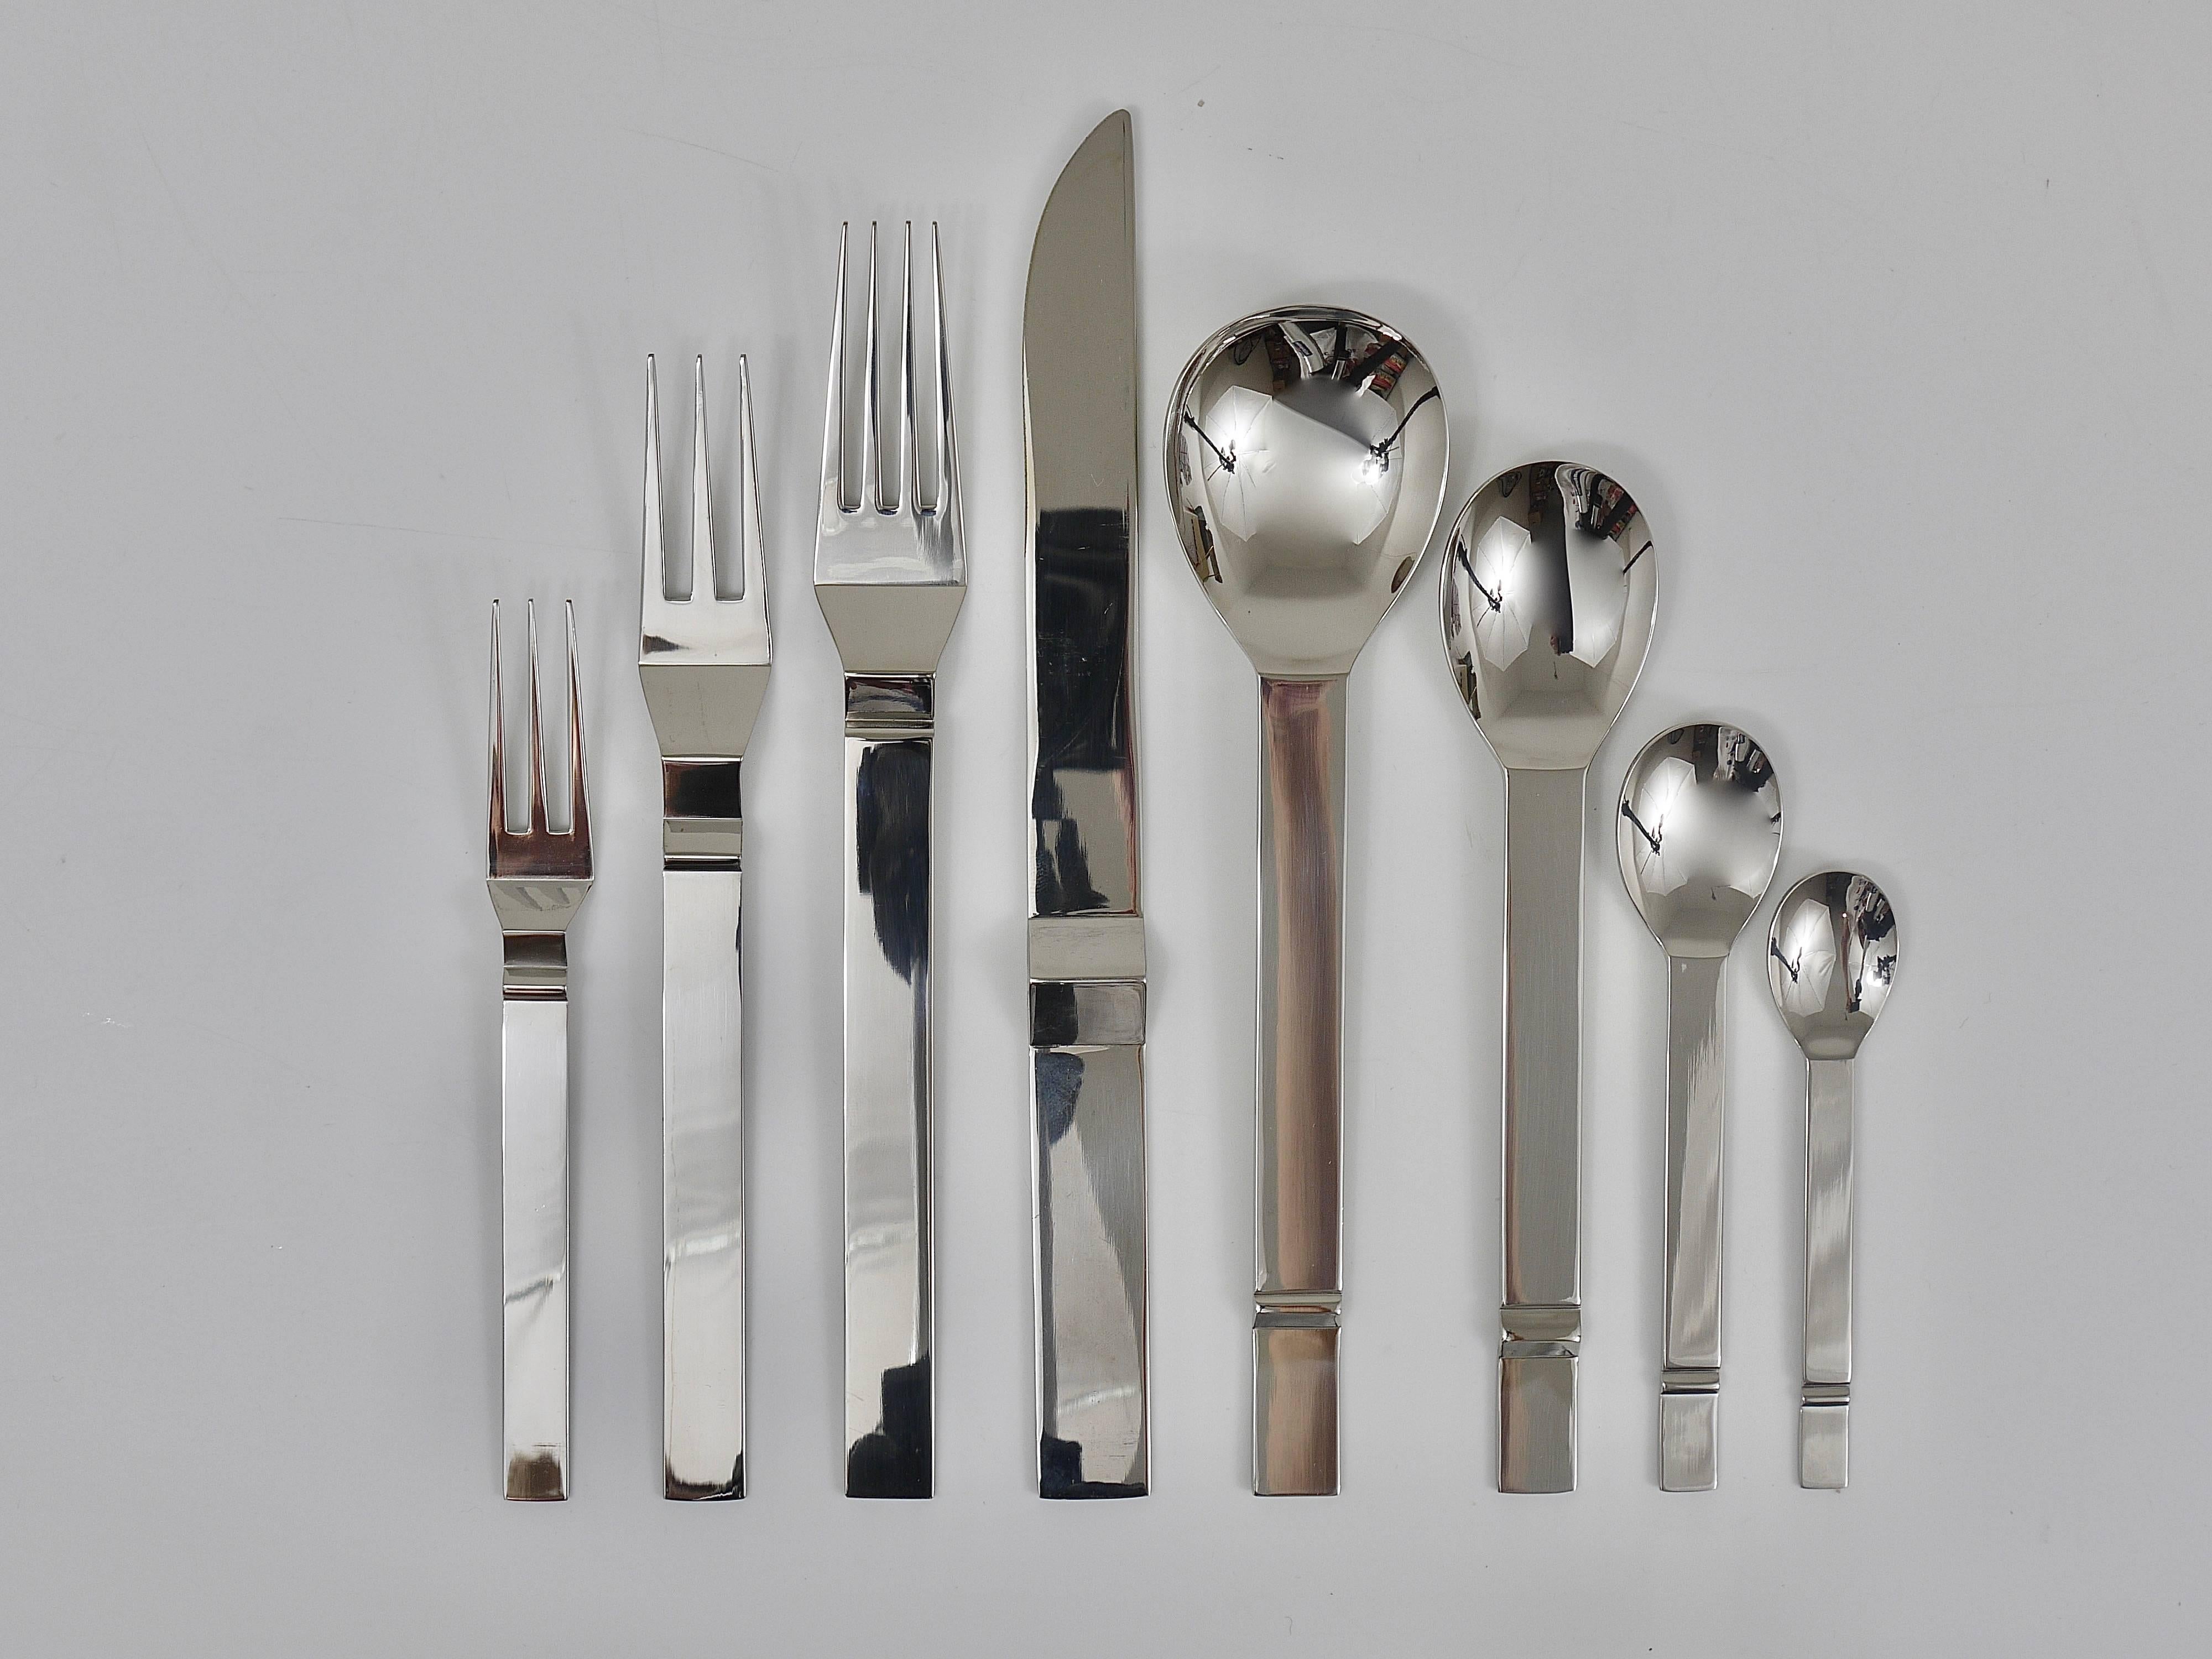 A comprehensive set of flatware, designed in the 1990s by Bob Patino (1942 - 1998) for Berndorf Austria. Beautiful and hard-to-find cutlery made of chrome-plated stainless steel discontinued. The set consists of six spoons, forks and knives, 6 small